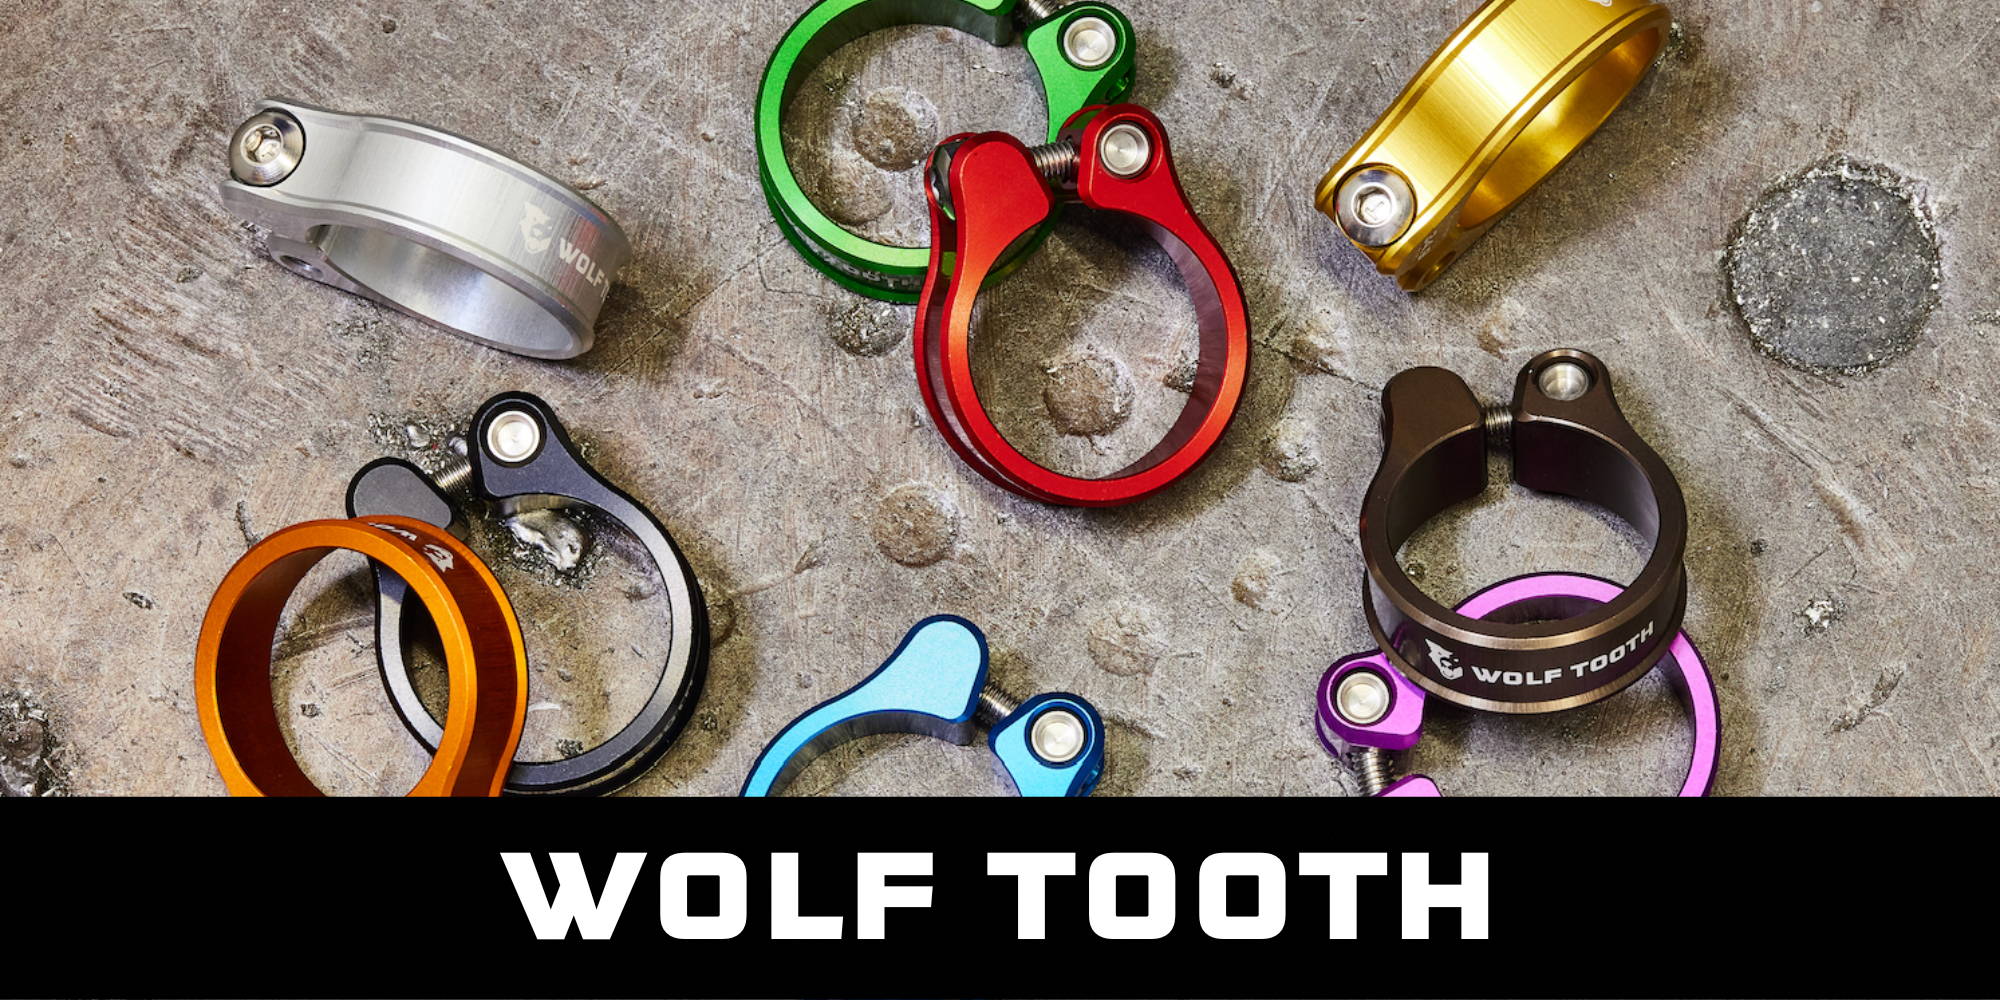 Wolf Tooth Bolt-Closure Seatpost Clamps in a variety of colors, including gold, green, silver, espresso, purple, blue, and orange.